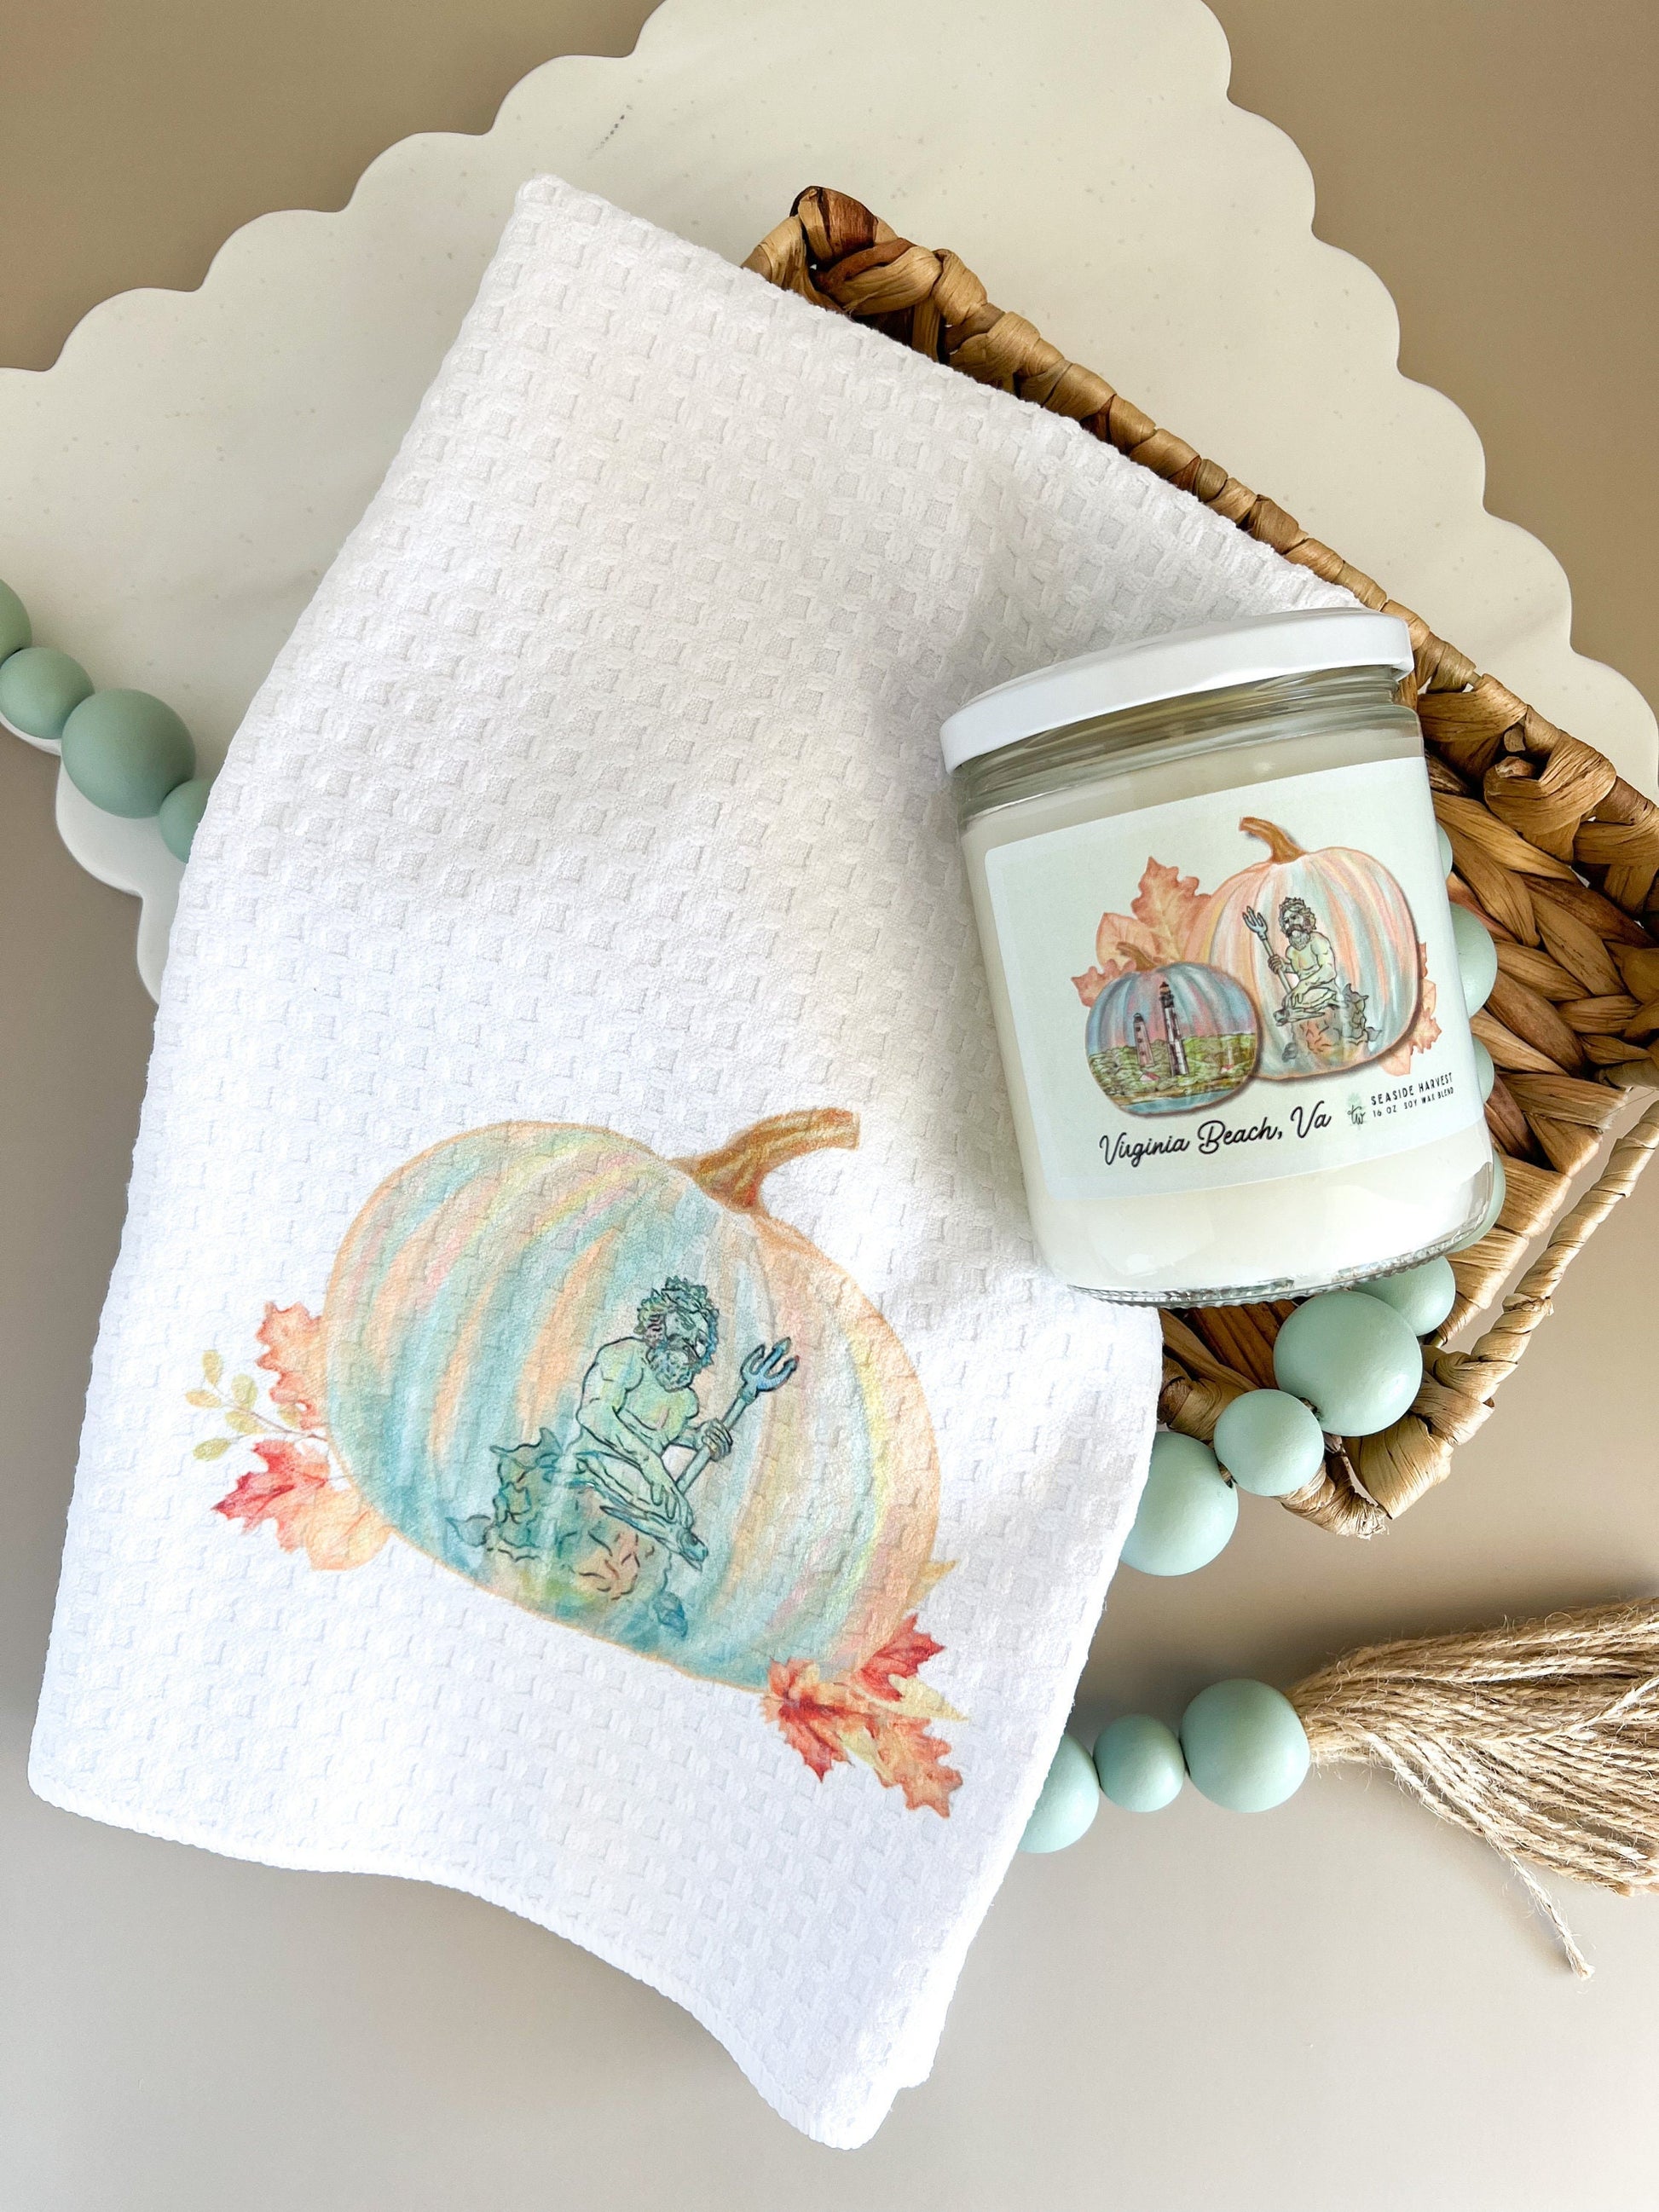 king Neptune statue design on a pumpkin.Printed on a tea towel and candle label.